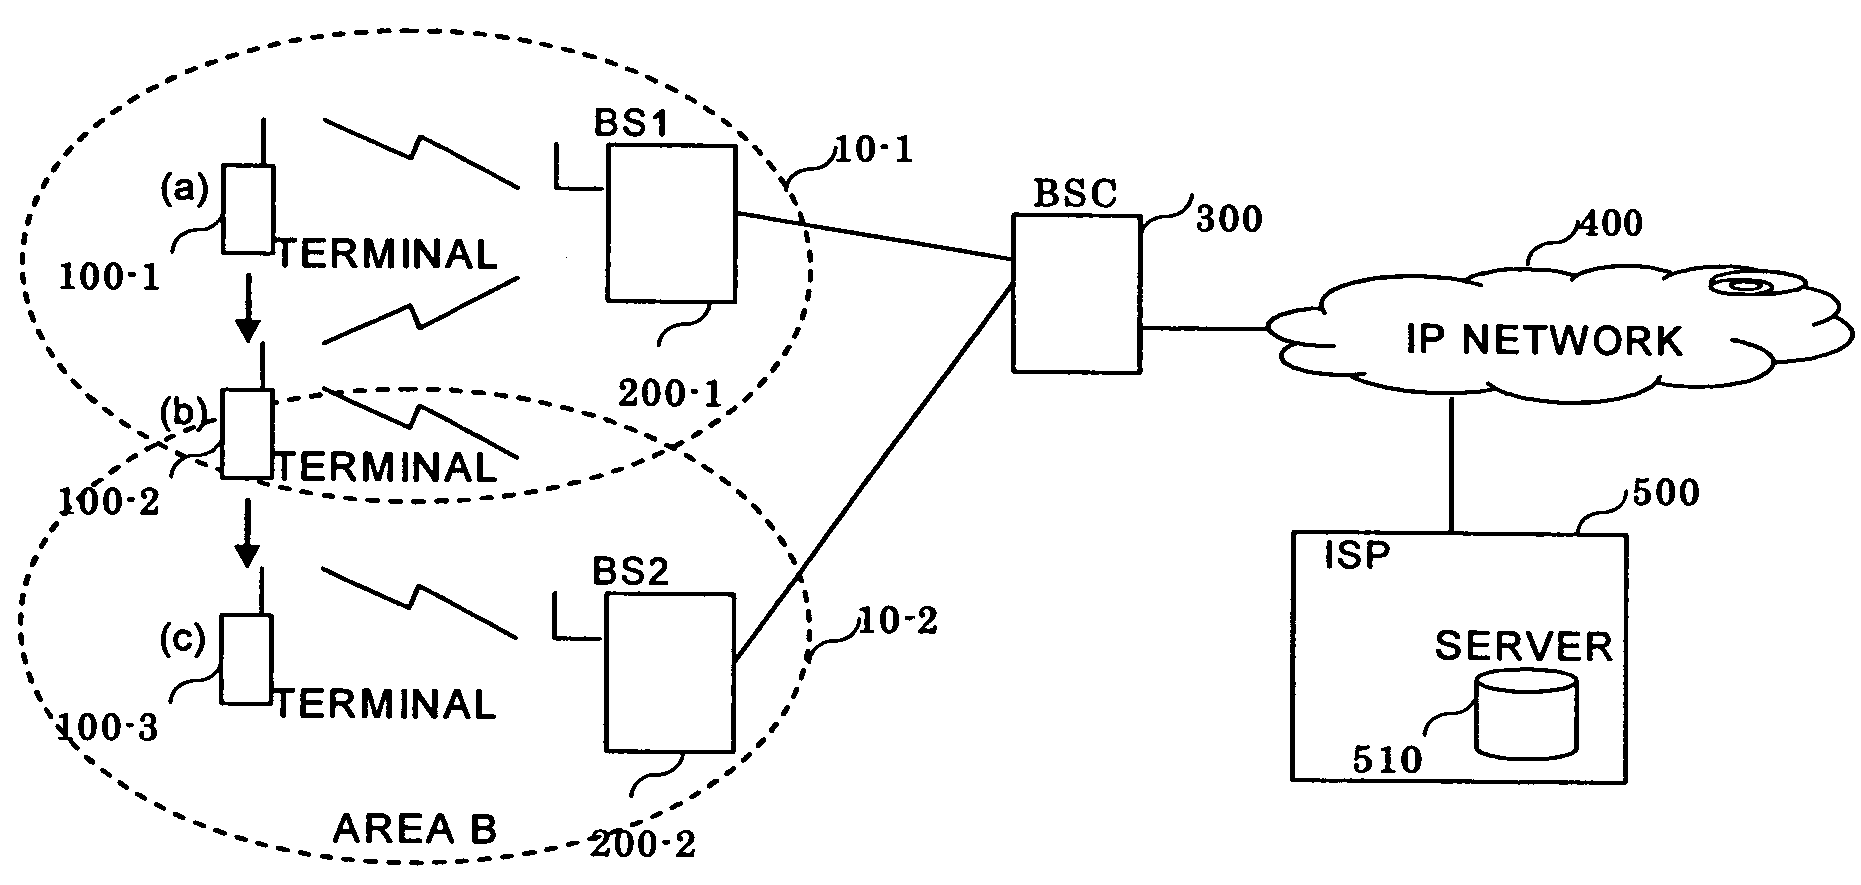 System and method for reducing a no-communication period during hand-off